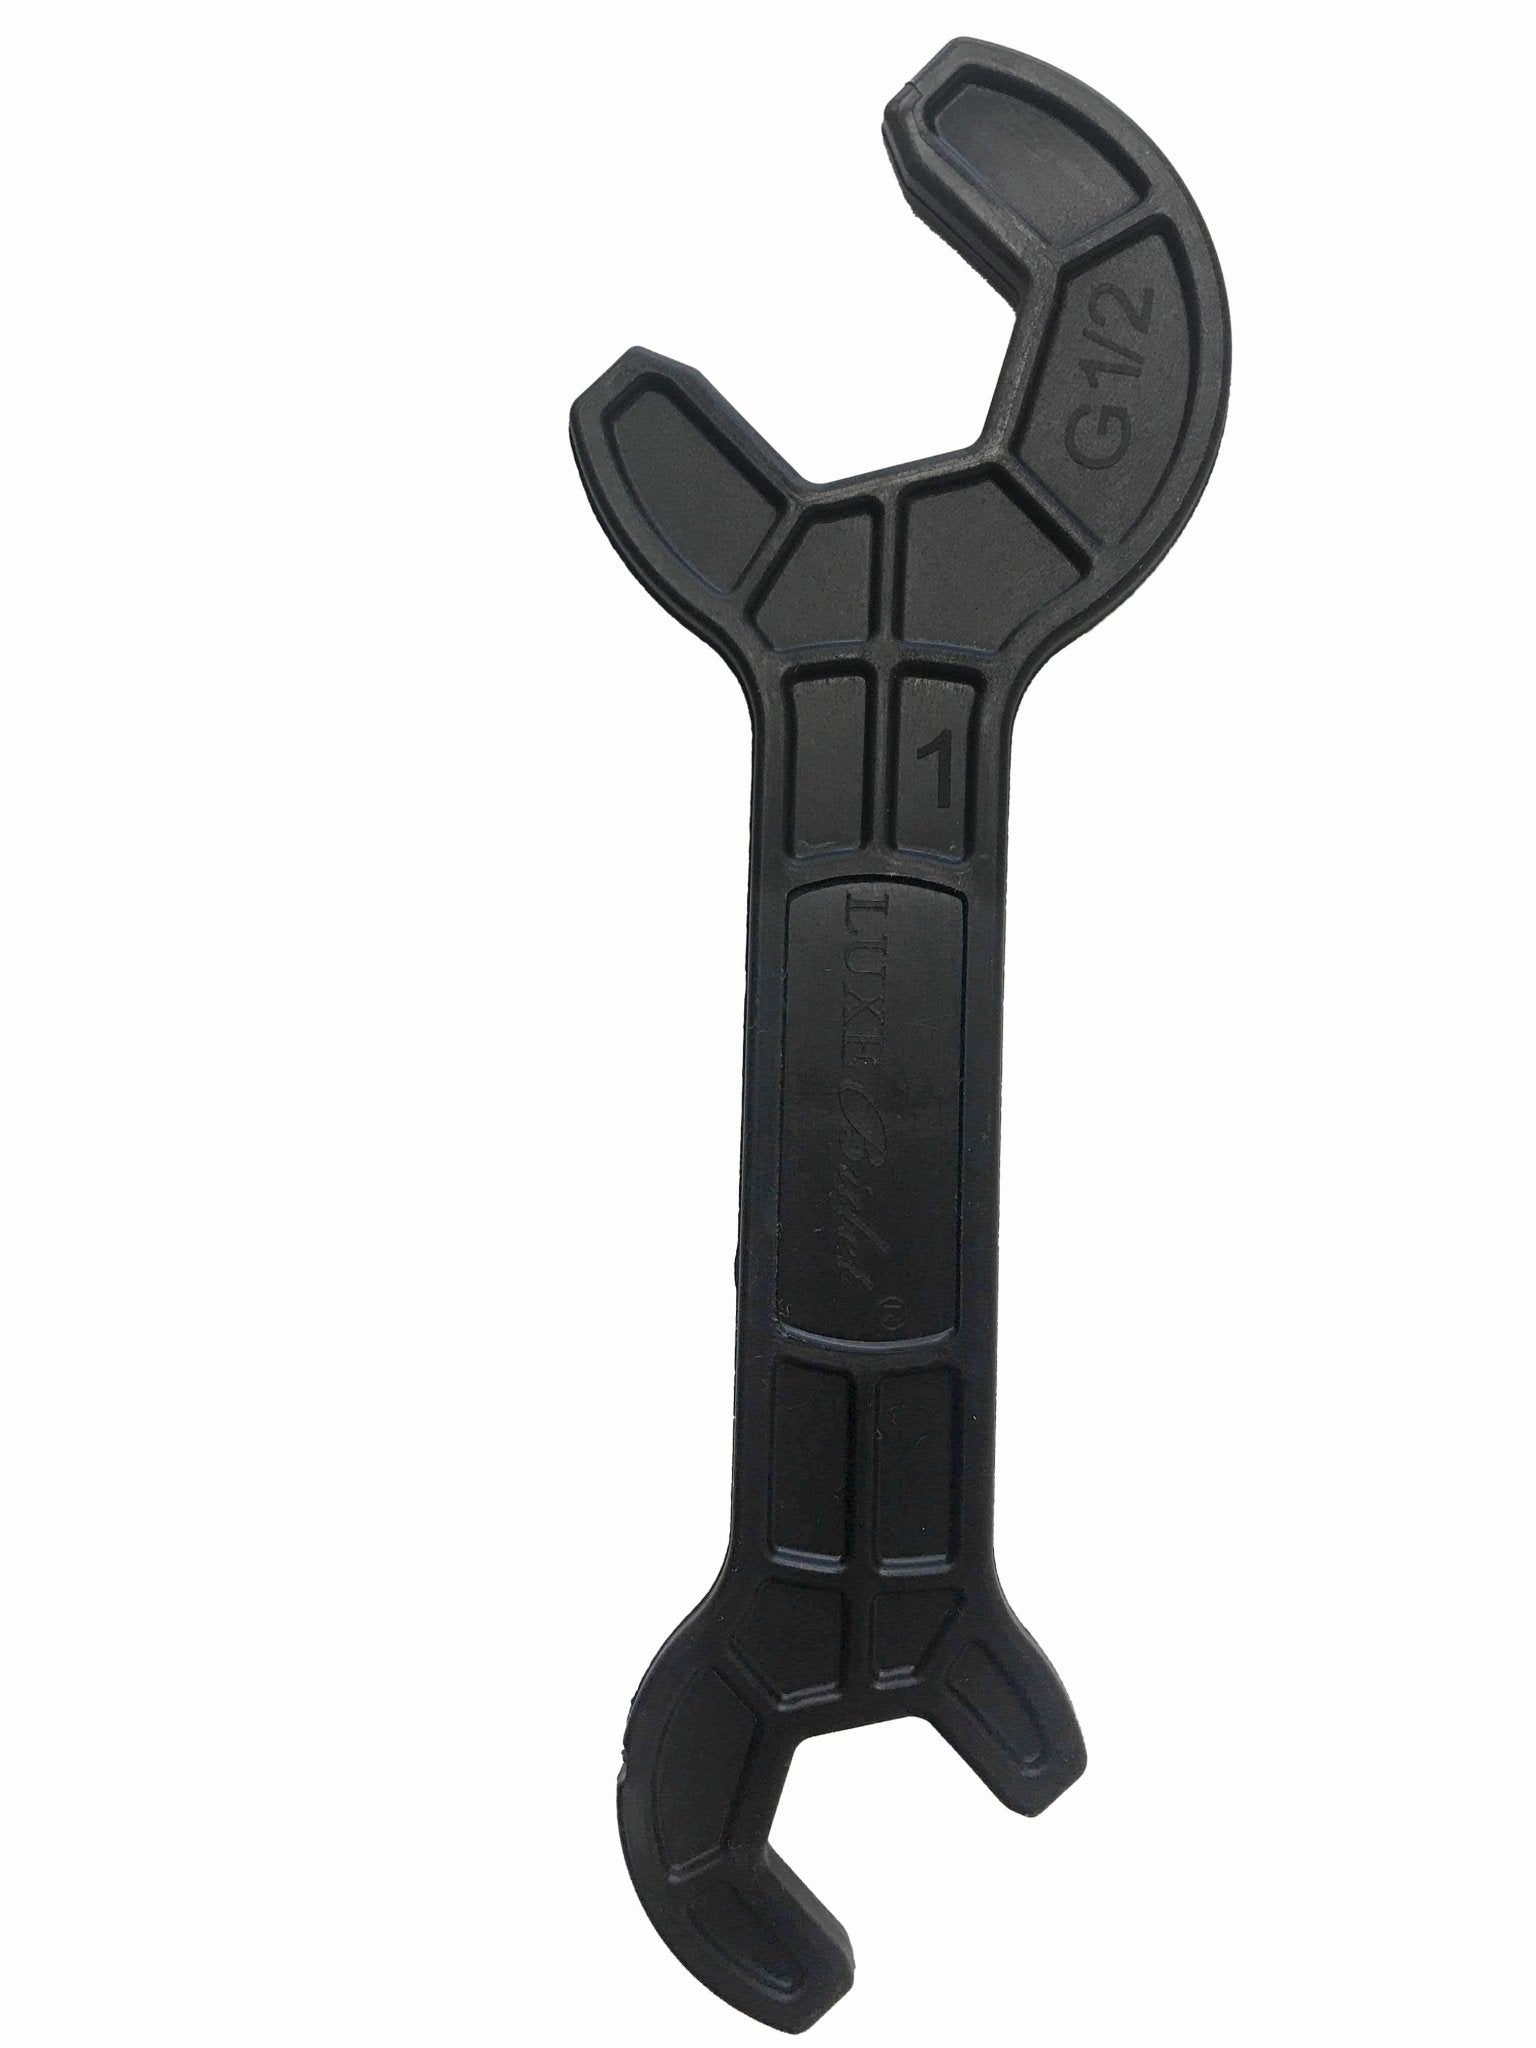 Plastic Wrench - 1/2 inch by 1/4 inch